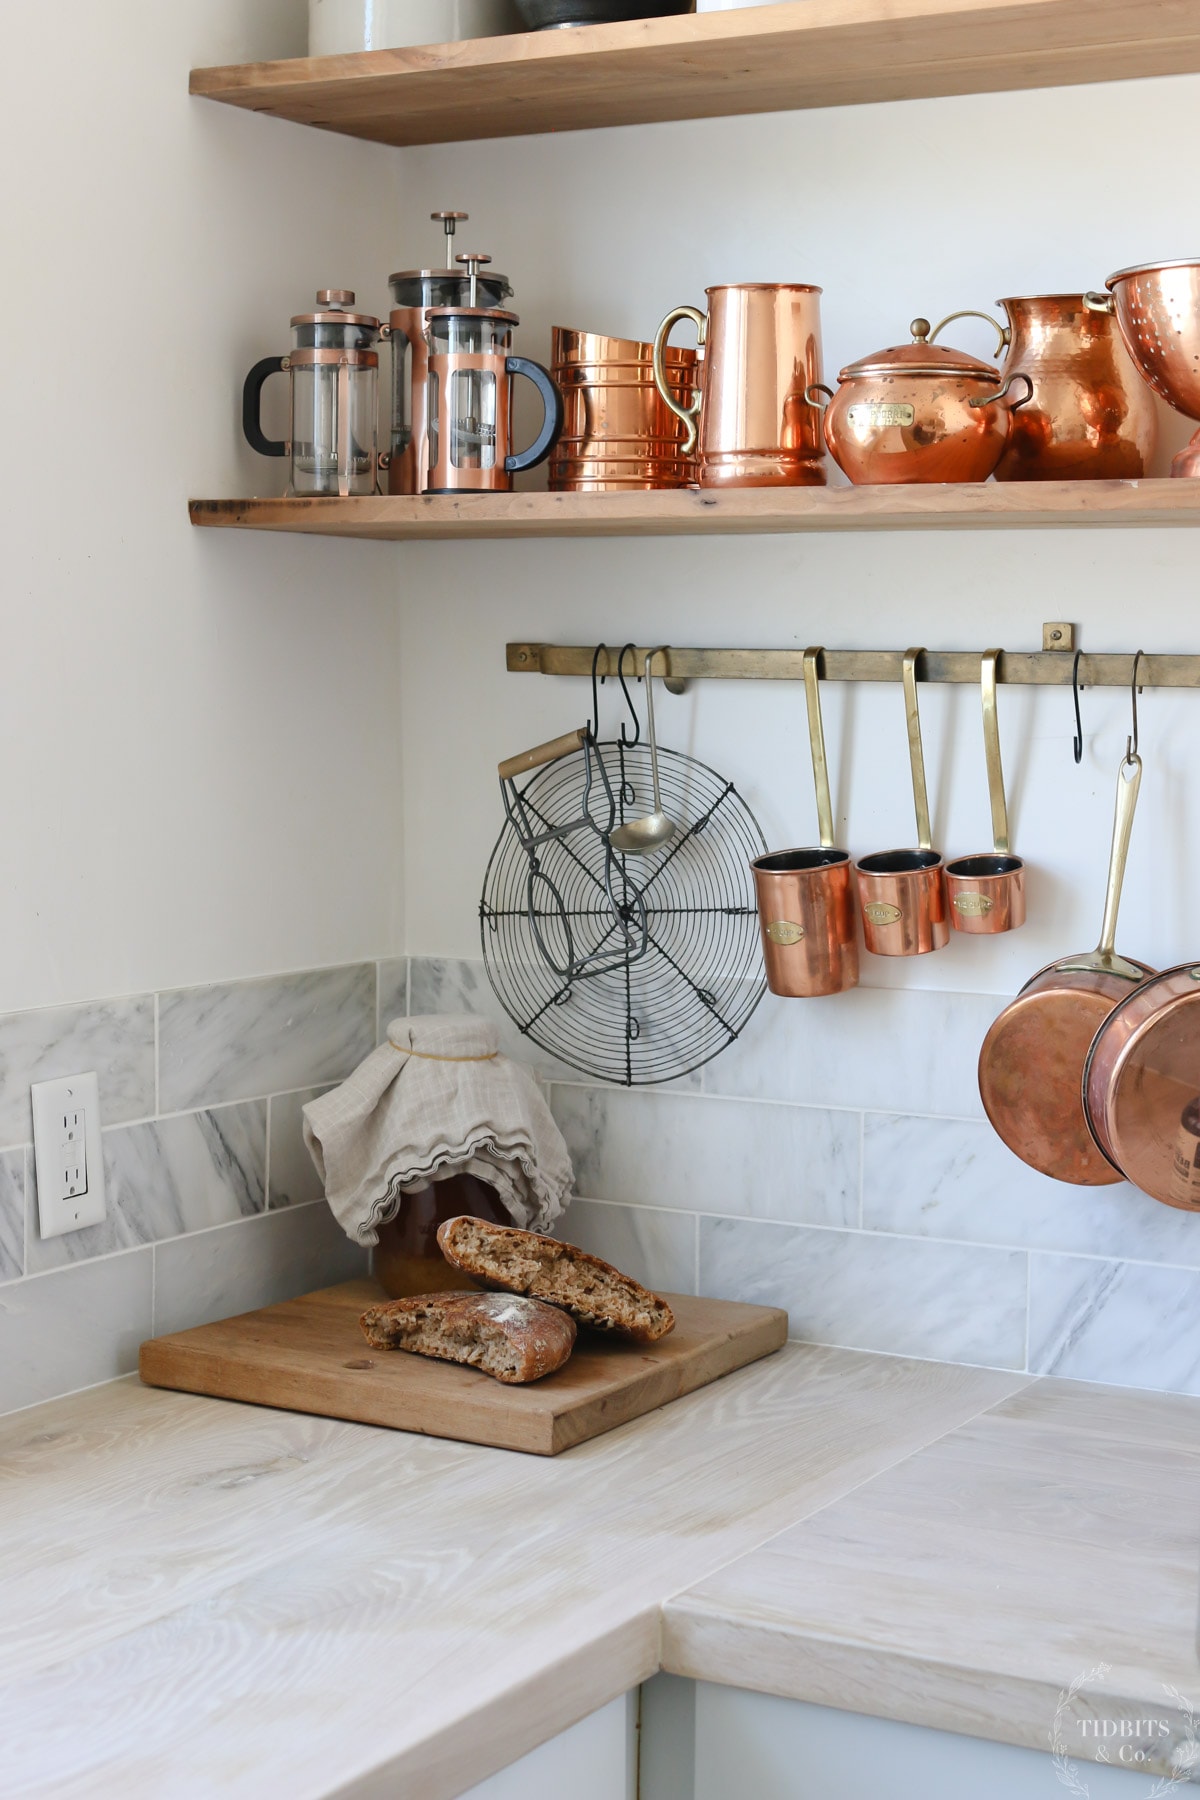 Copper pots and pans hang on a kitchen rack and sit on a wood shelf